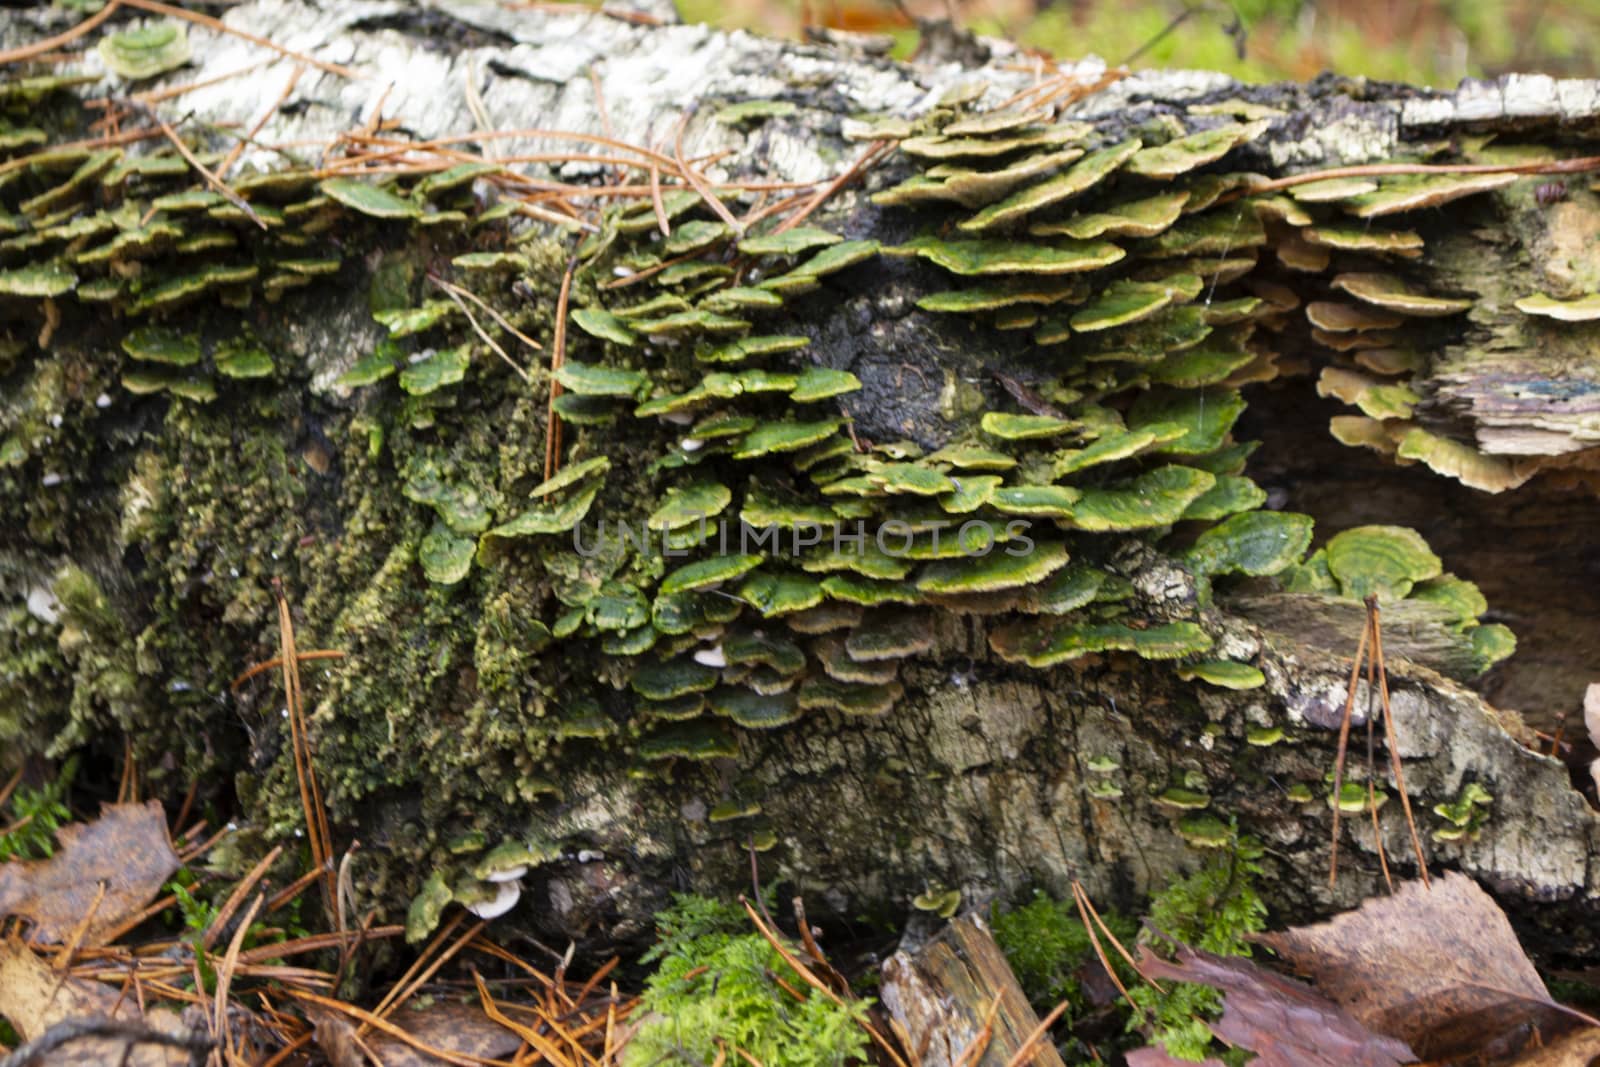 Lenzites betulina known as gilled polypore, birch mazegill or green gill polypore, fungus with medicinal properties from Belarus